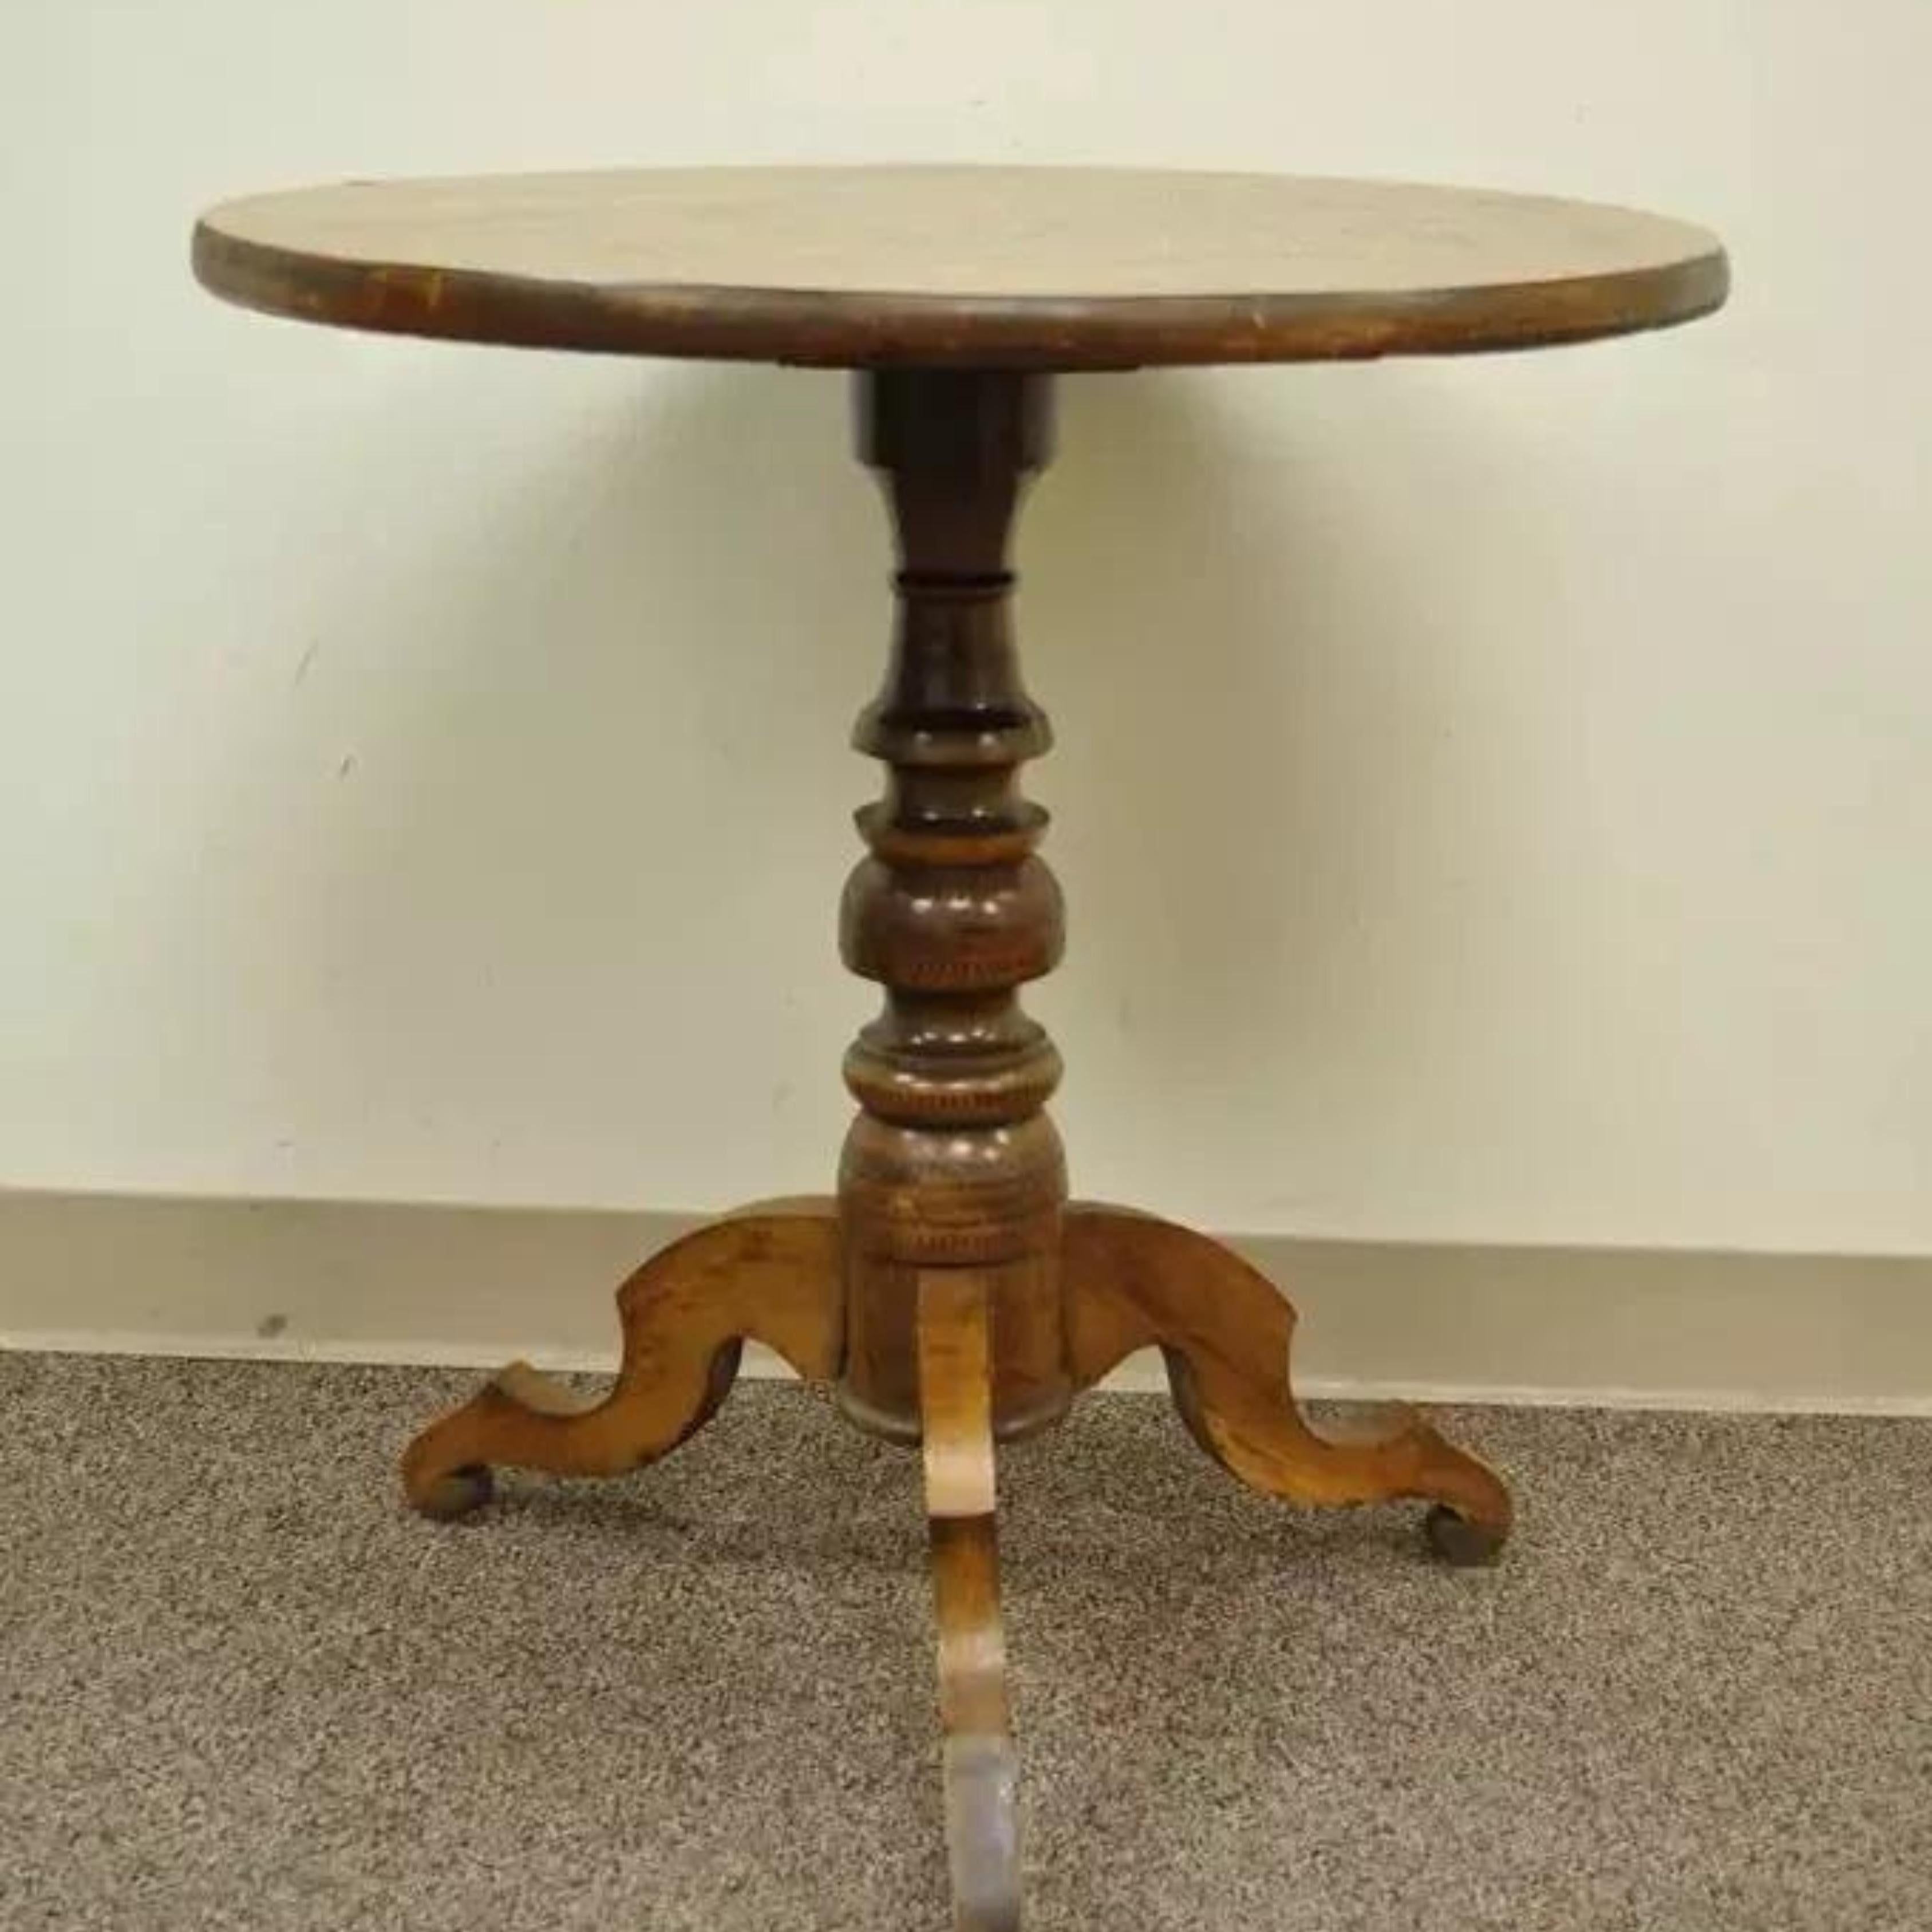 19th Century Antique Italian Sorrentino Parquetry Inlaid Round Pedestal Center Table. Item features beautiful parquet inlay on table top and pedestal base, shapely tripod legs, sturdy solid wood construction, very nice vintage item. Circa 19th